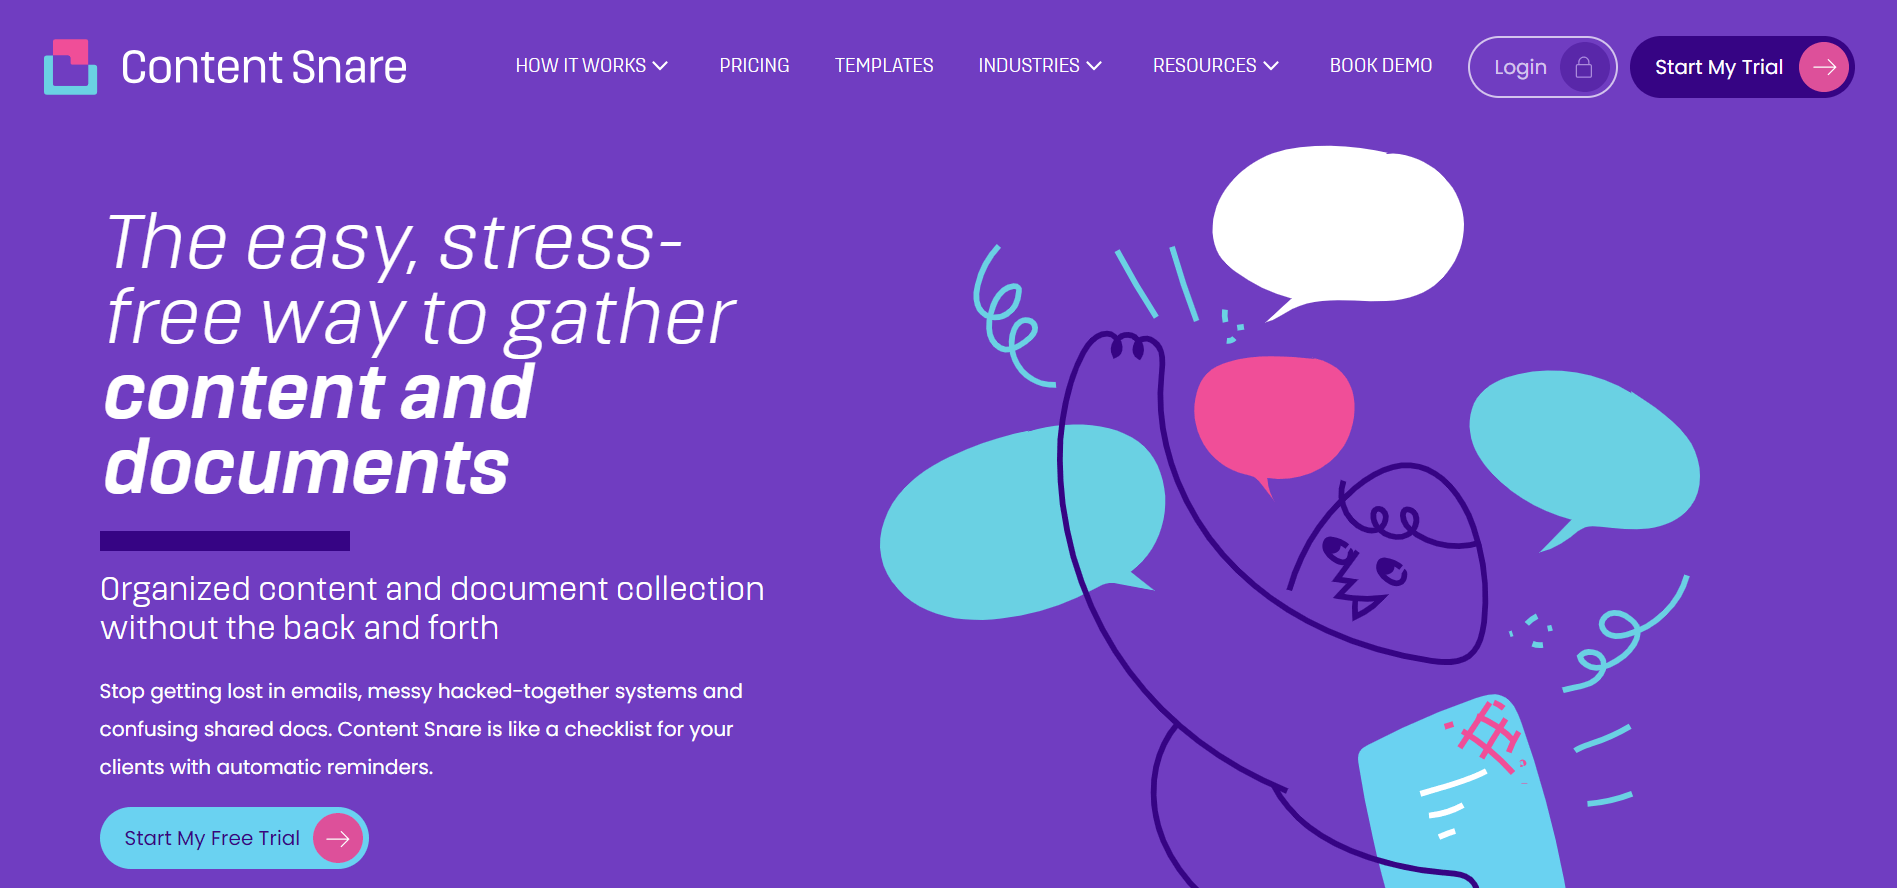 Purple coloured ContentSnare homepage showing the motto "The easy, stress-free way to gather content and documents".